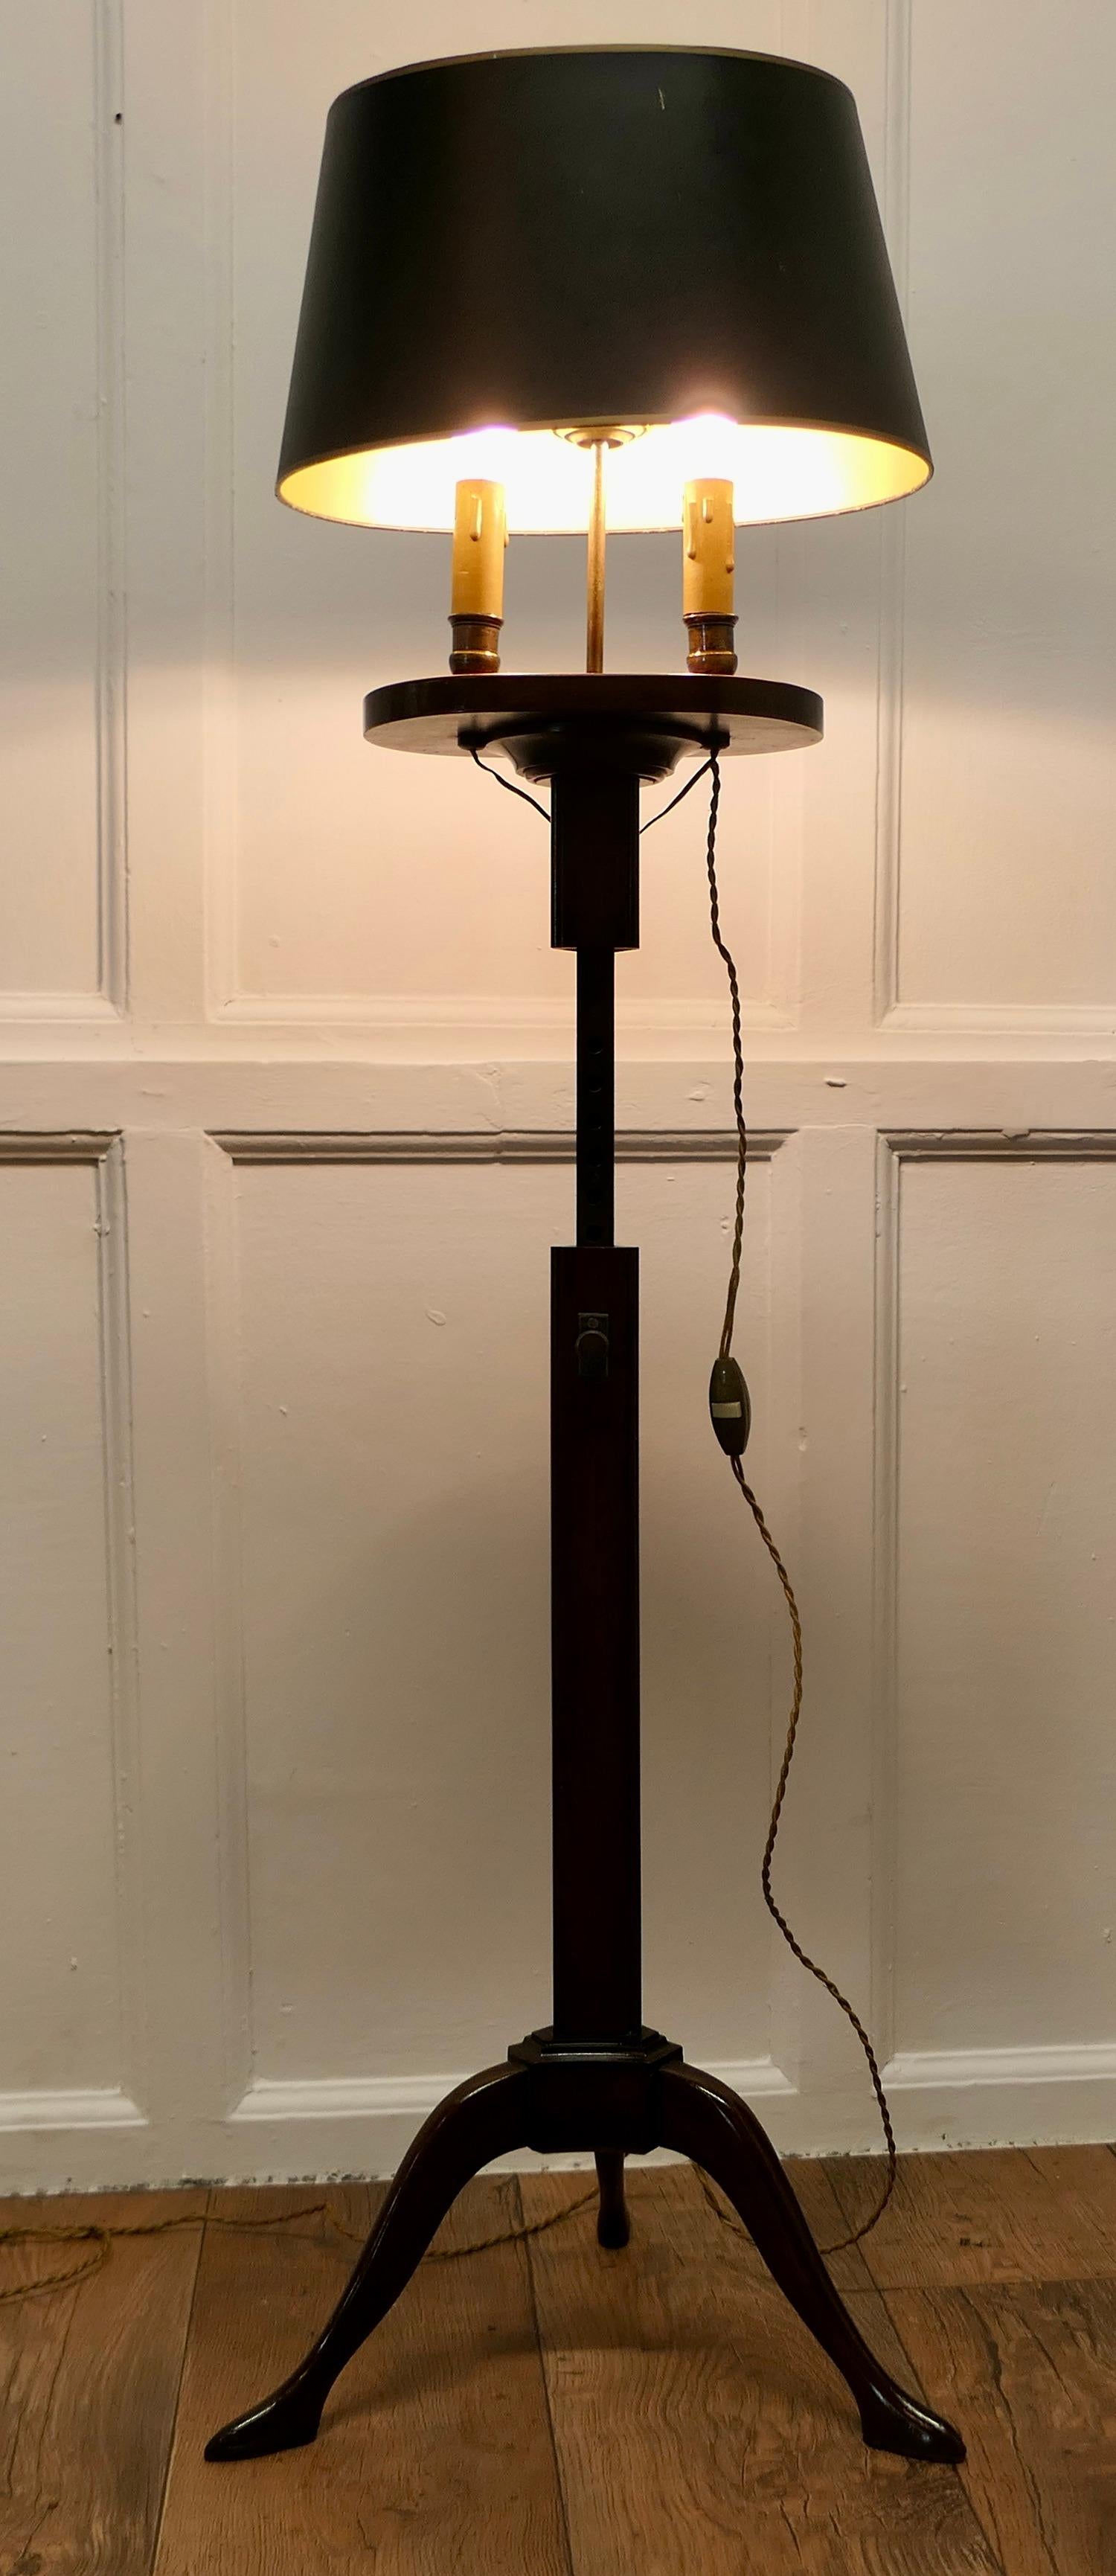 French Provincial Bouillotte Floor Lamp, Adjustable Twin Candle Lamp This is an Elegant Piece For Sale